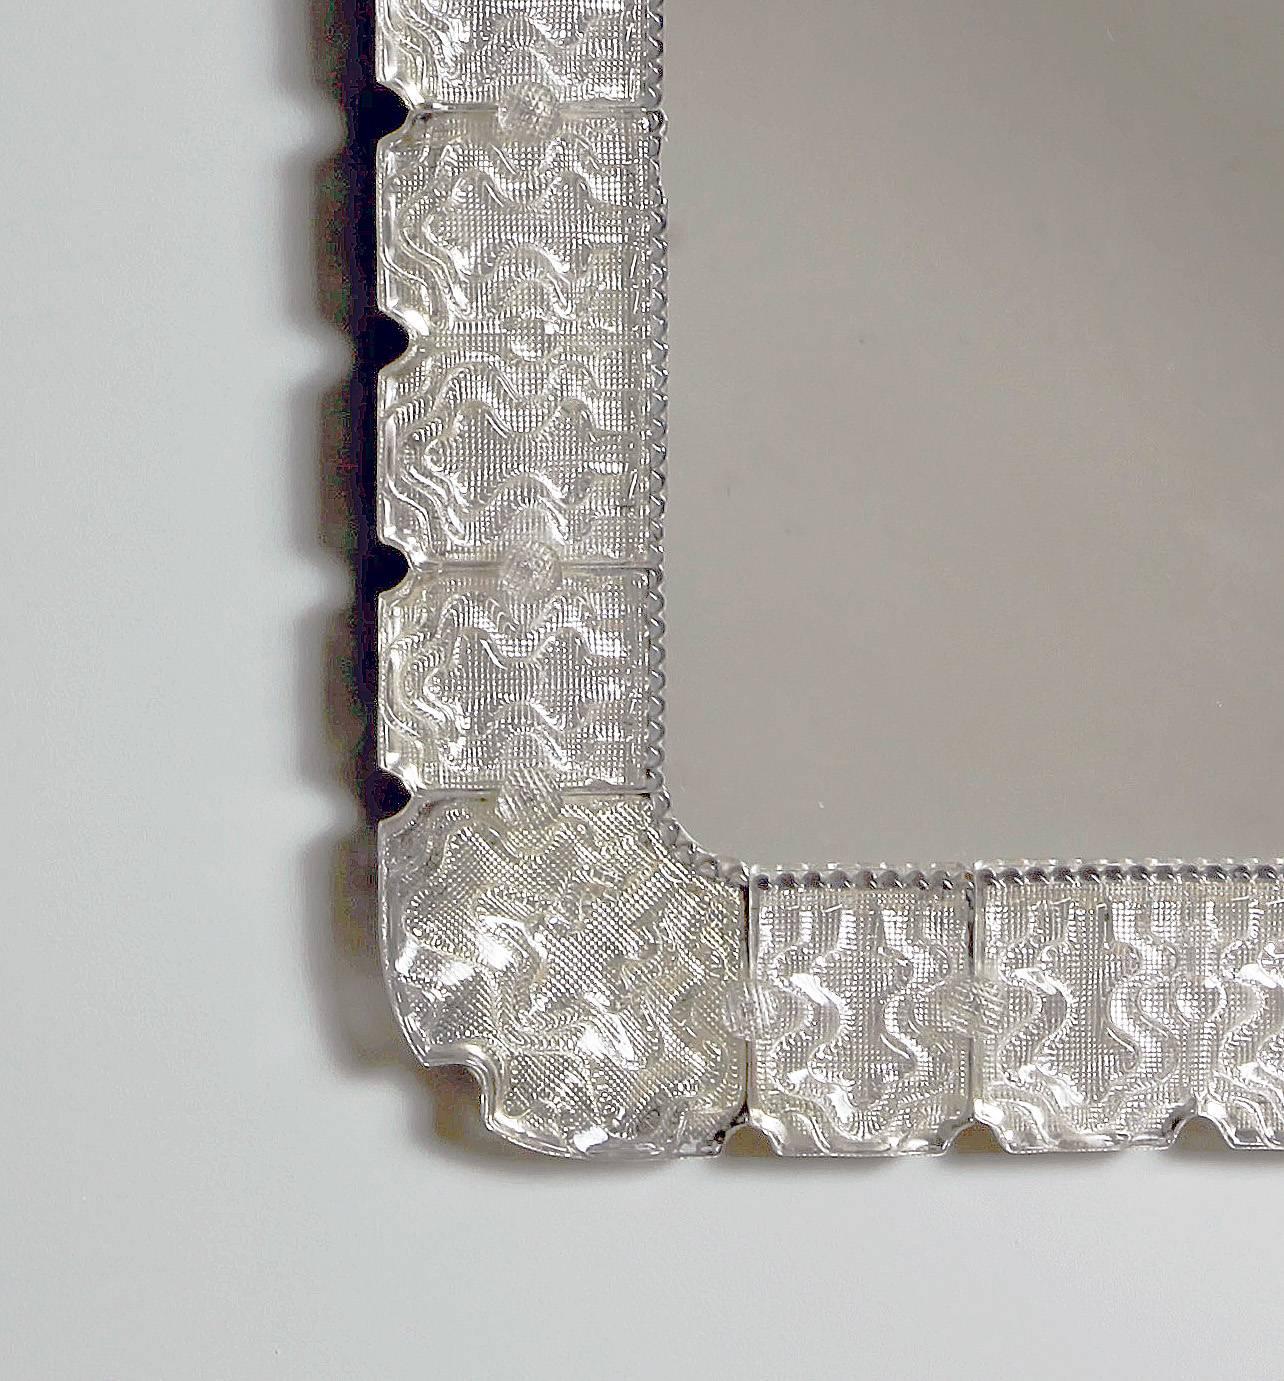 A large rectangular mirror with molded glass frame and beaded glass inner edge. The thick glass segments attached with glass buttons. Produced by Orrefors in the middle of the 20th century.